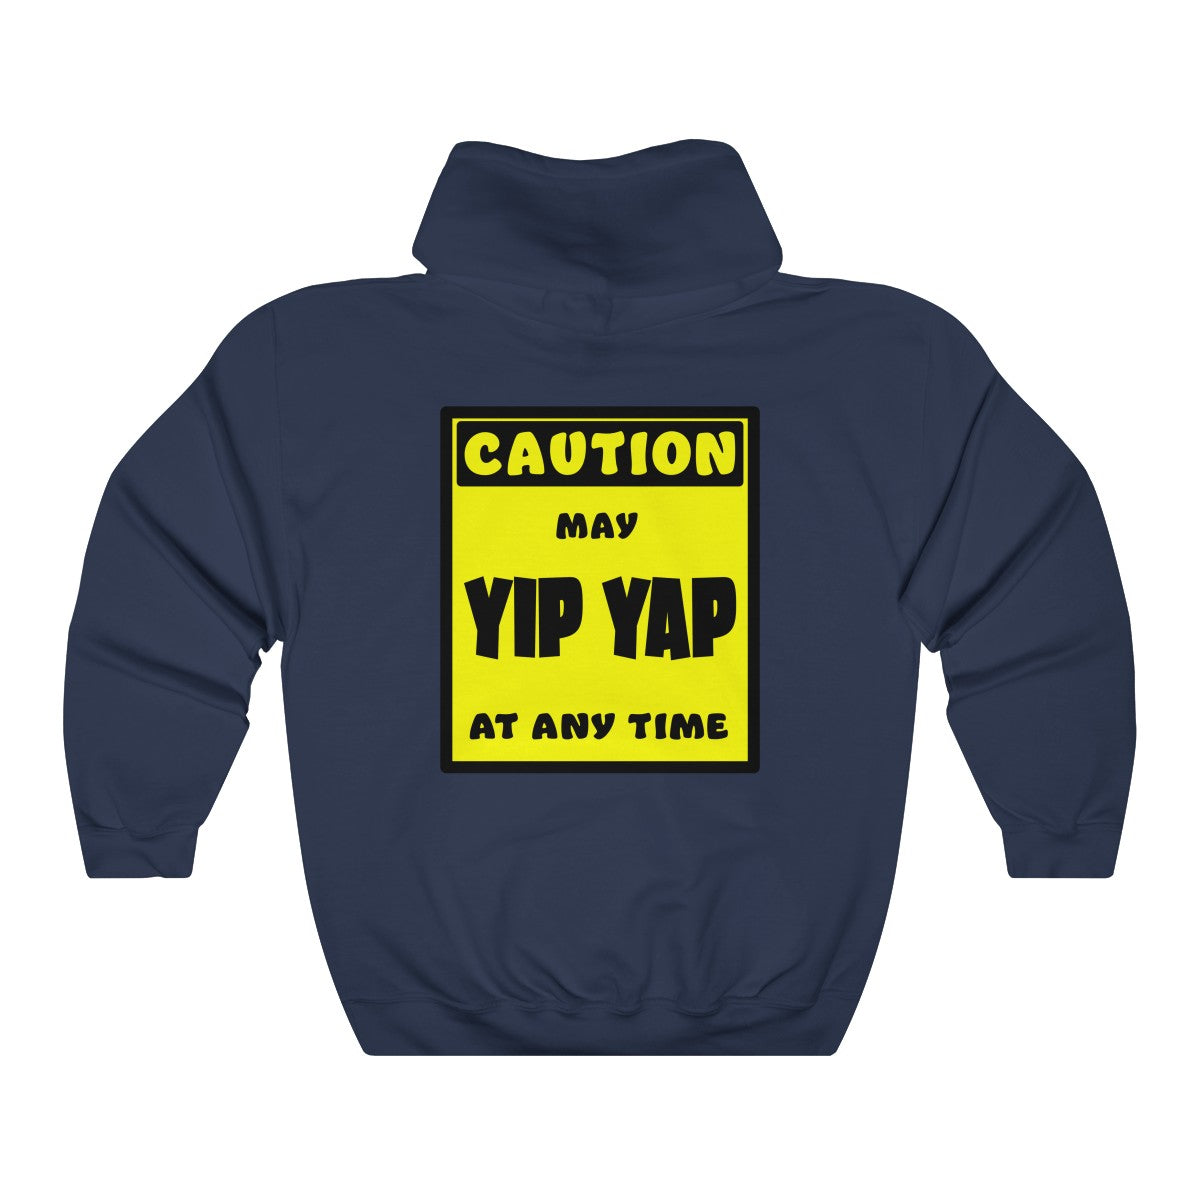 CAUTION! May Yip Yap at any time! - Hoodie Hoodie AFLT-Whootorca Navy Blue S 